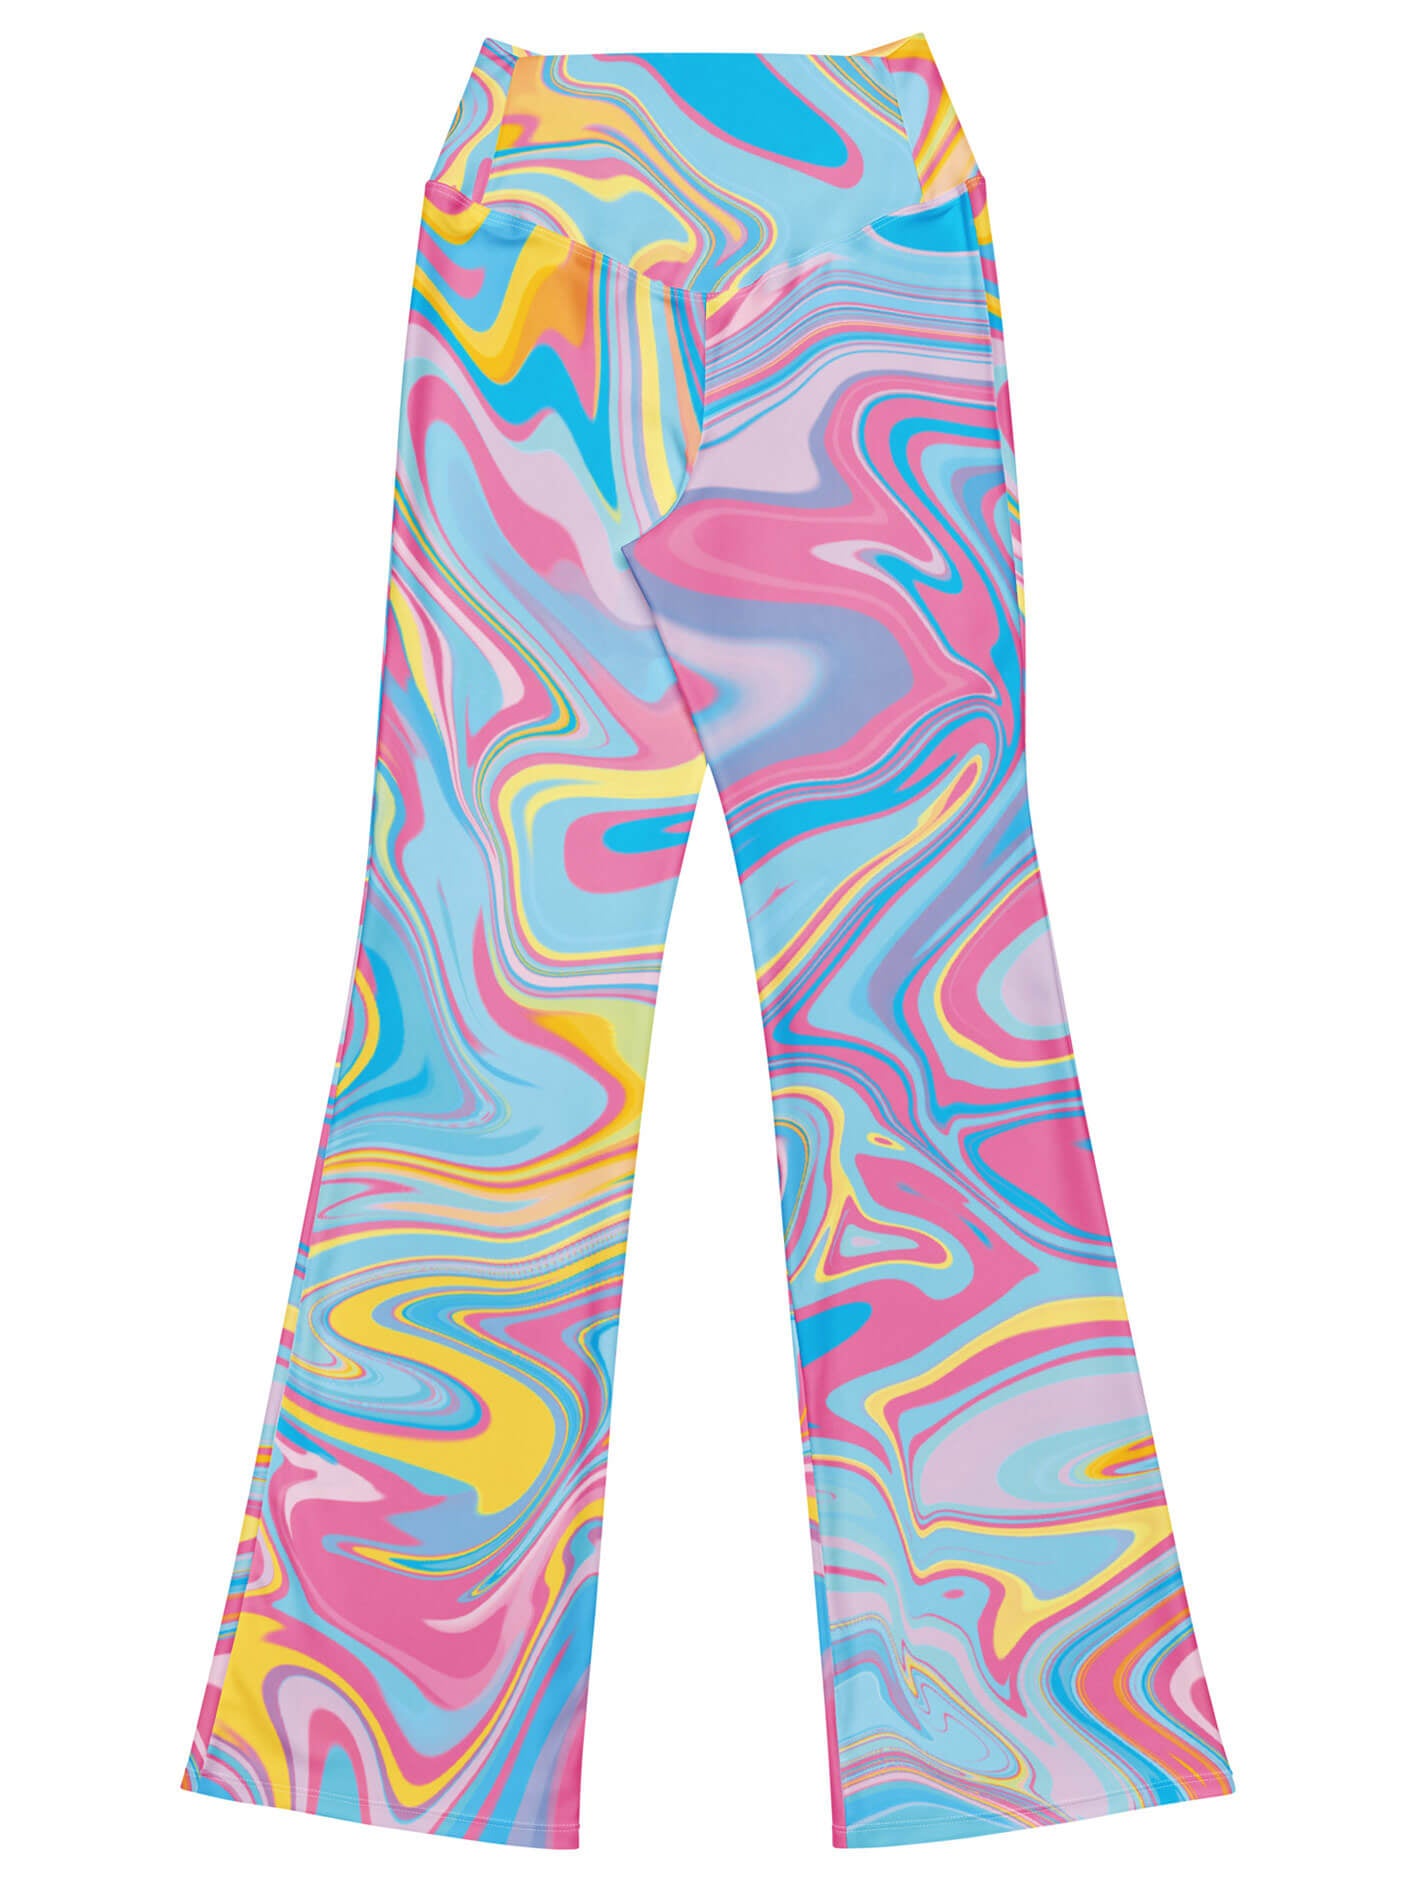 Psychedelic plus size trippy flare leggings.